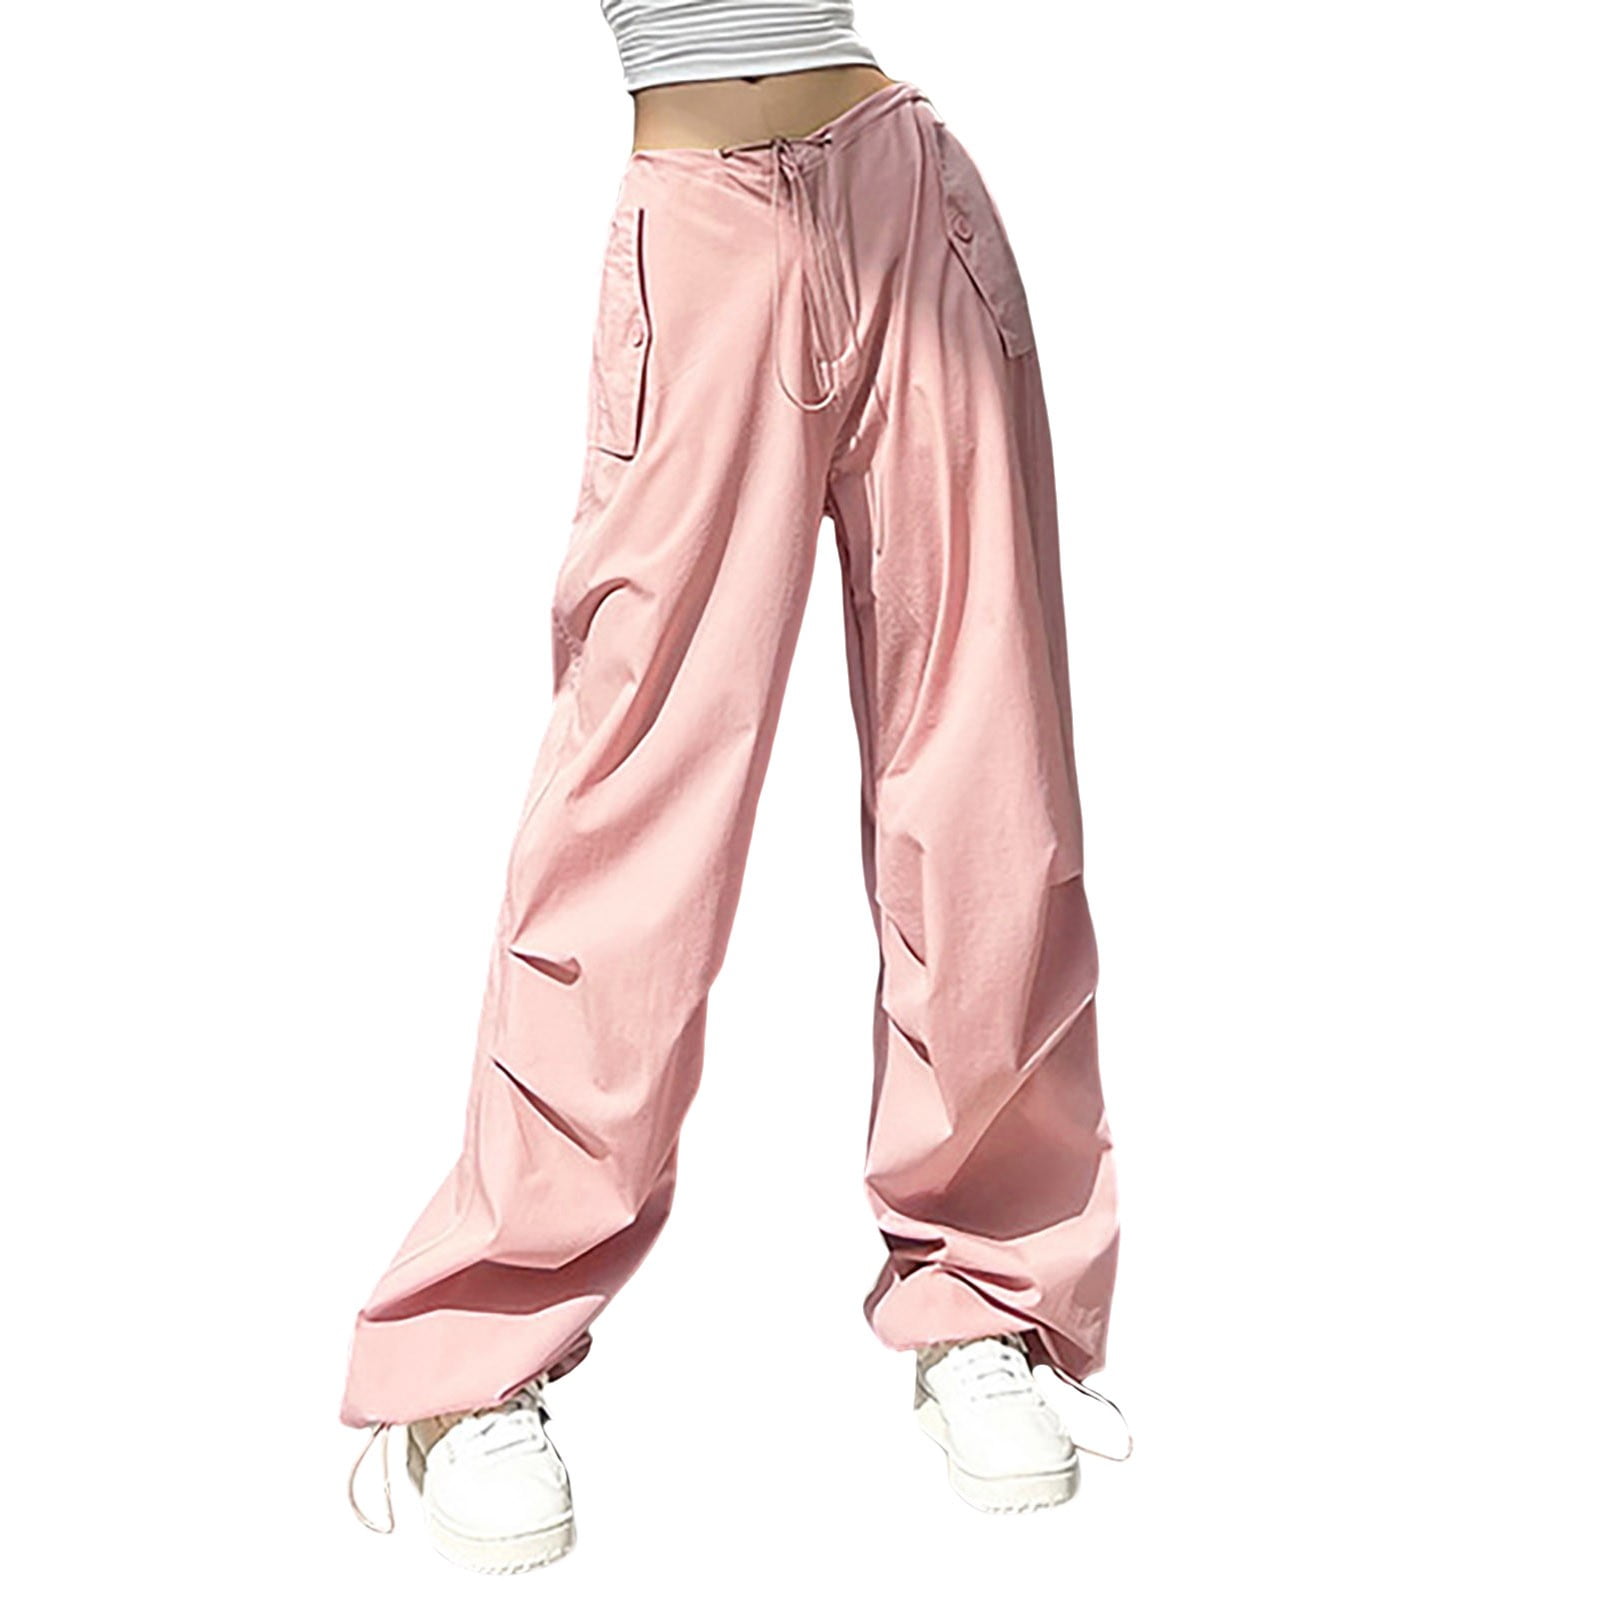 Time to clear something up I have seen lots of references to parachute  pants on this sub Parachute pants are the tight fitting pants shown on the  left popular in the early